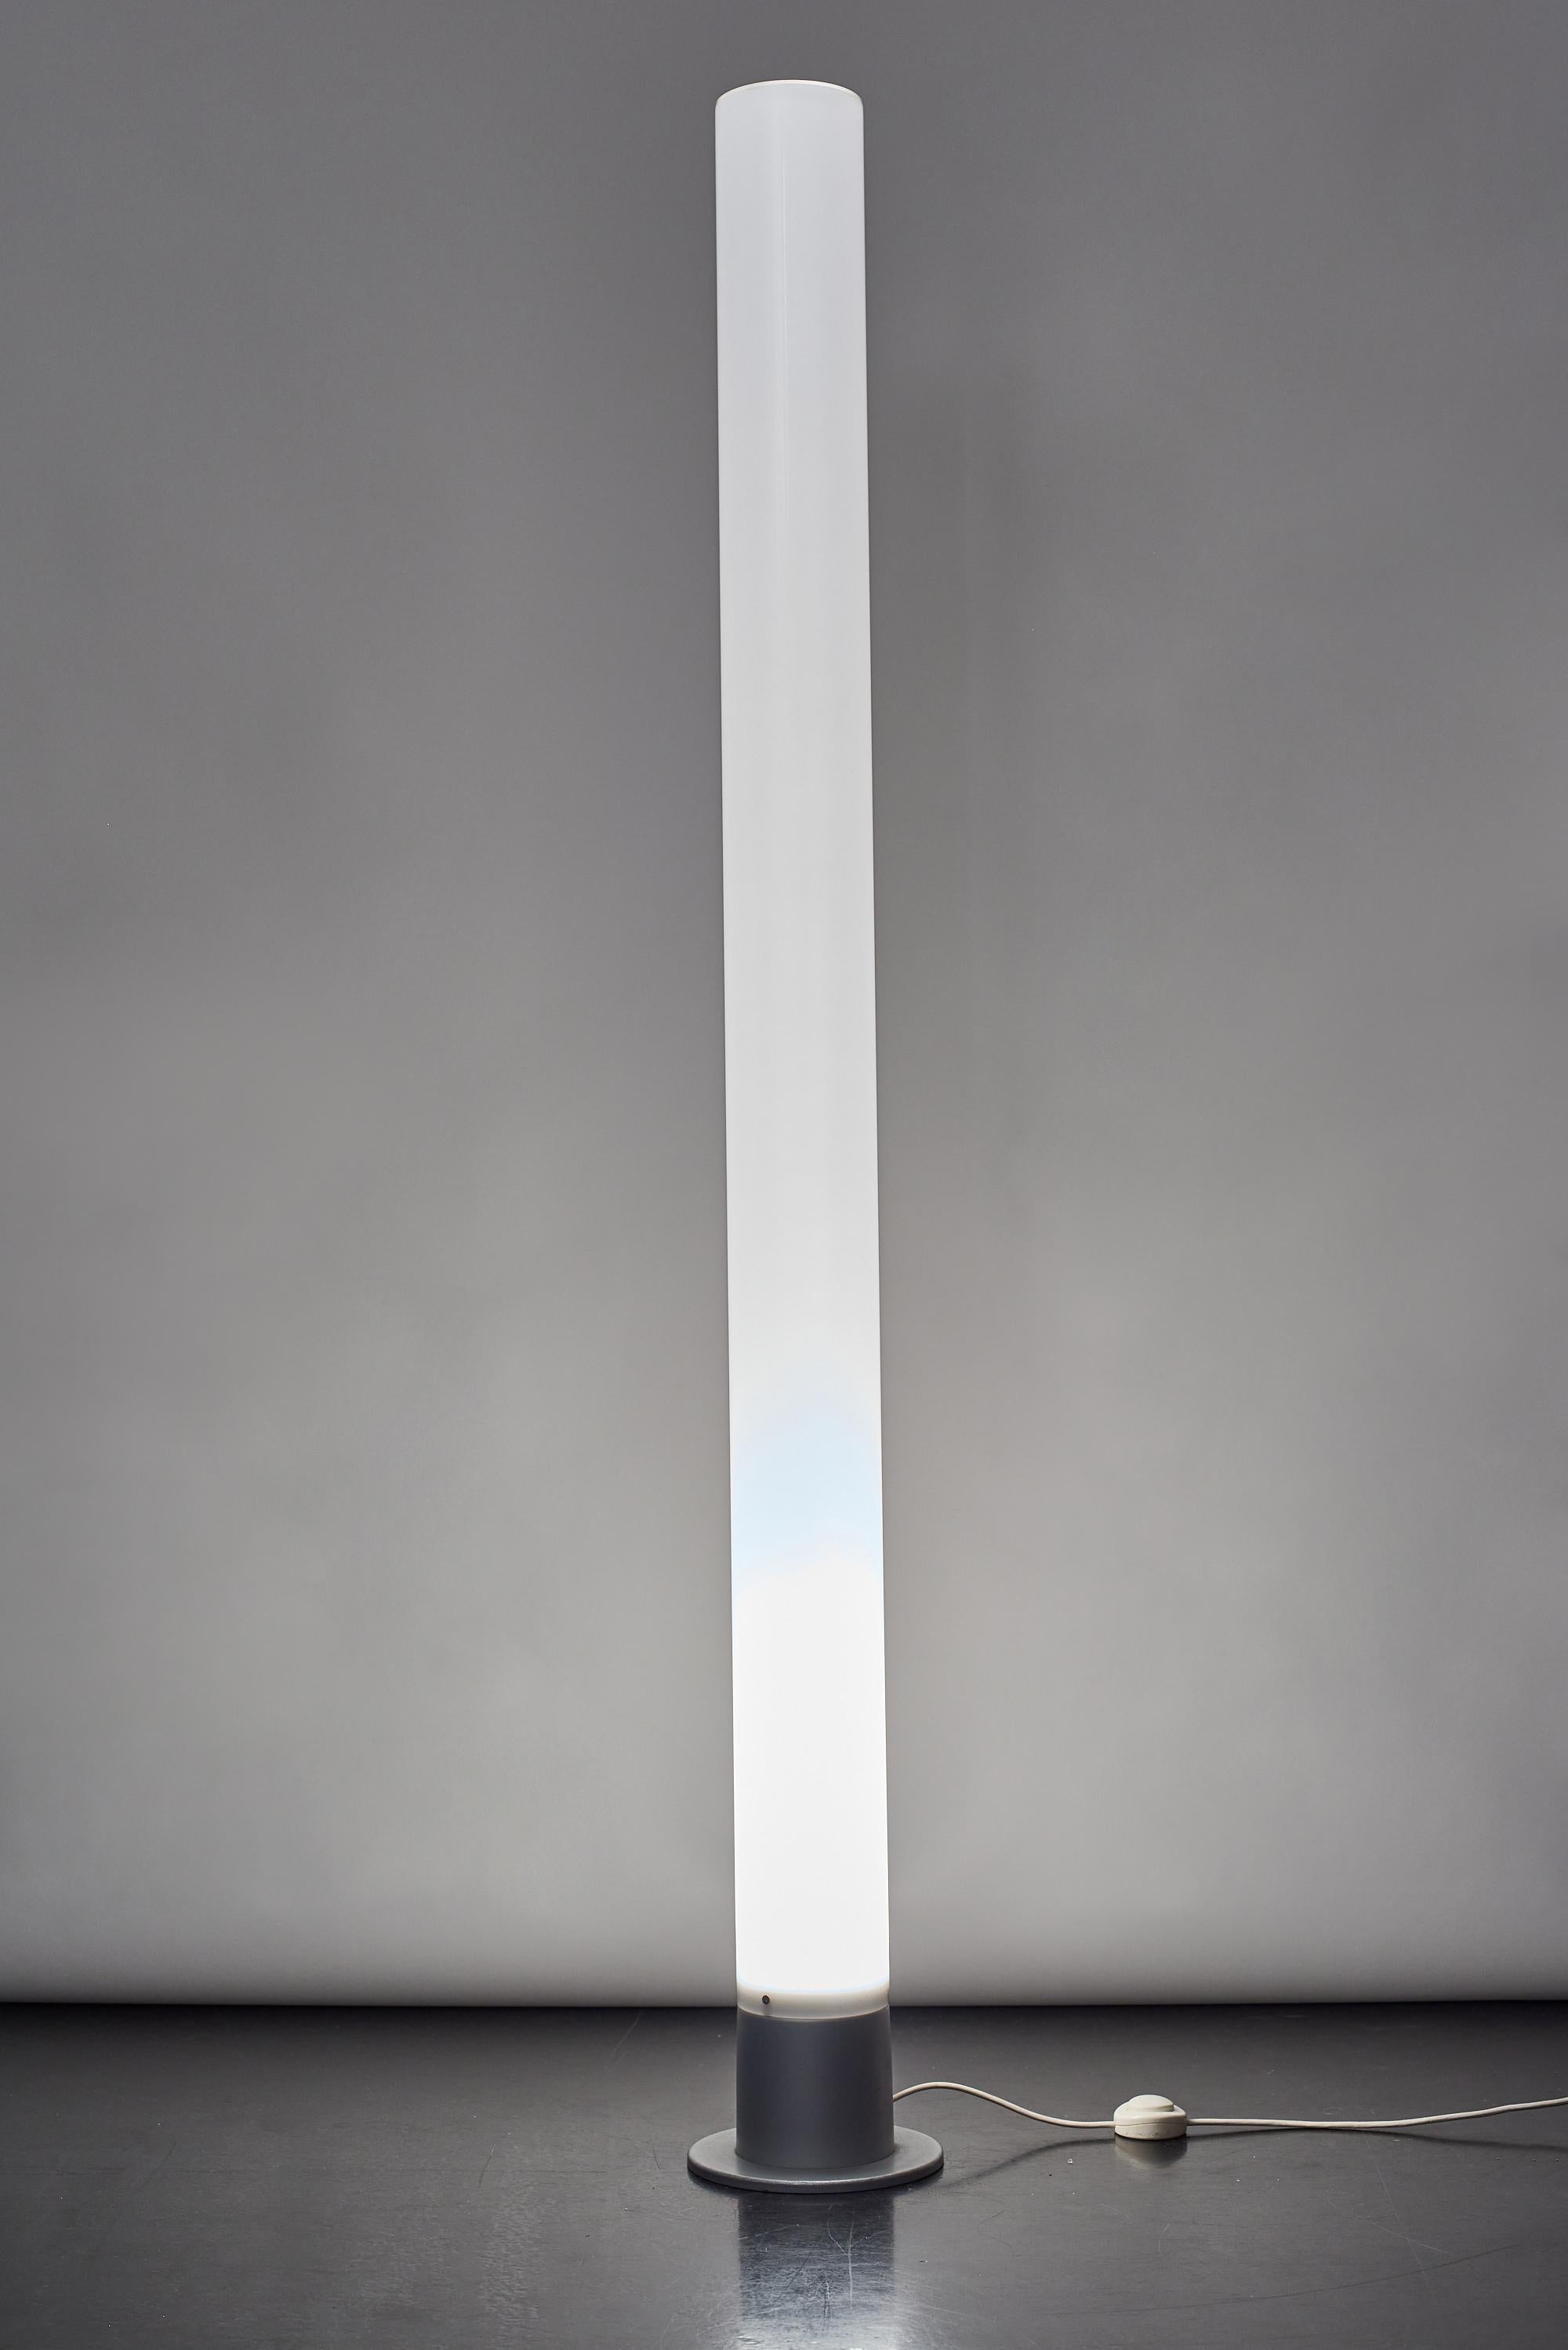 Flos Bespoke ‘Contract Project’ floor lamp based on ‘Stylos’ by Achille Castiglioni for Flos, 1984.
Flos Bespoke is the division of Flos Group specializing in the development and production of custom lighting solutions, from the personalization of